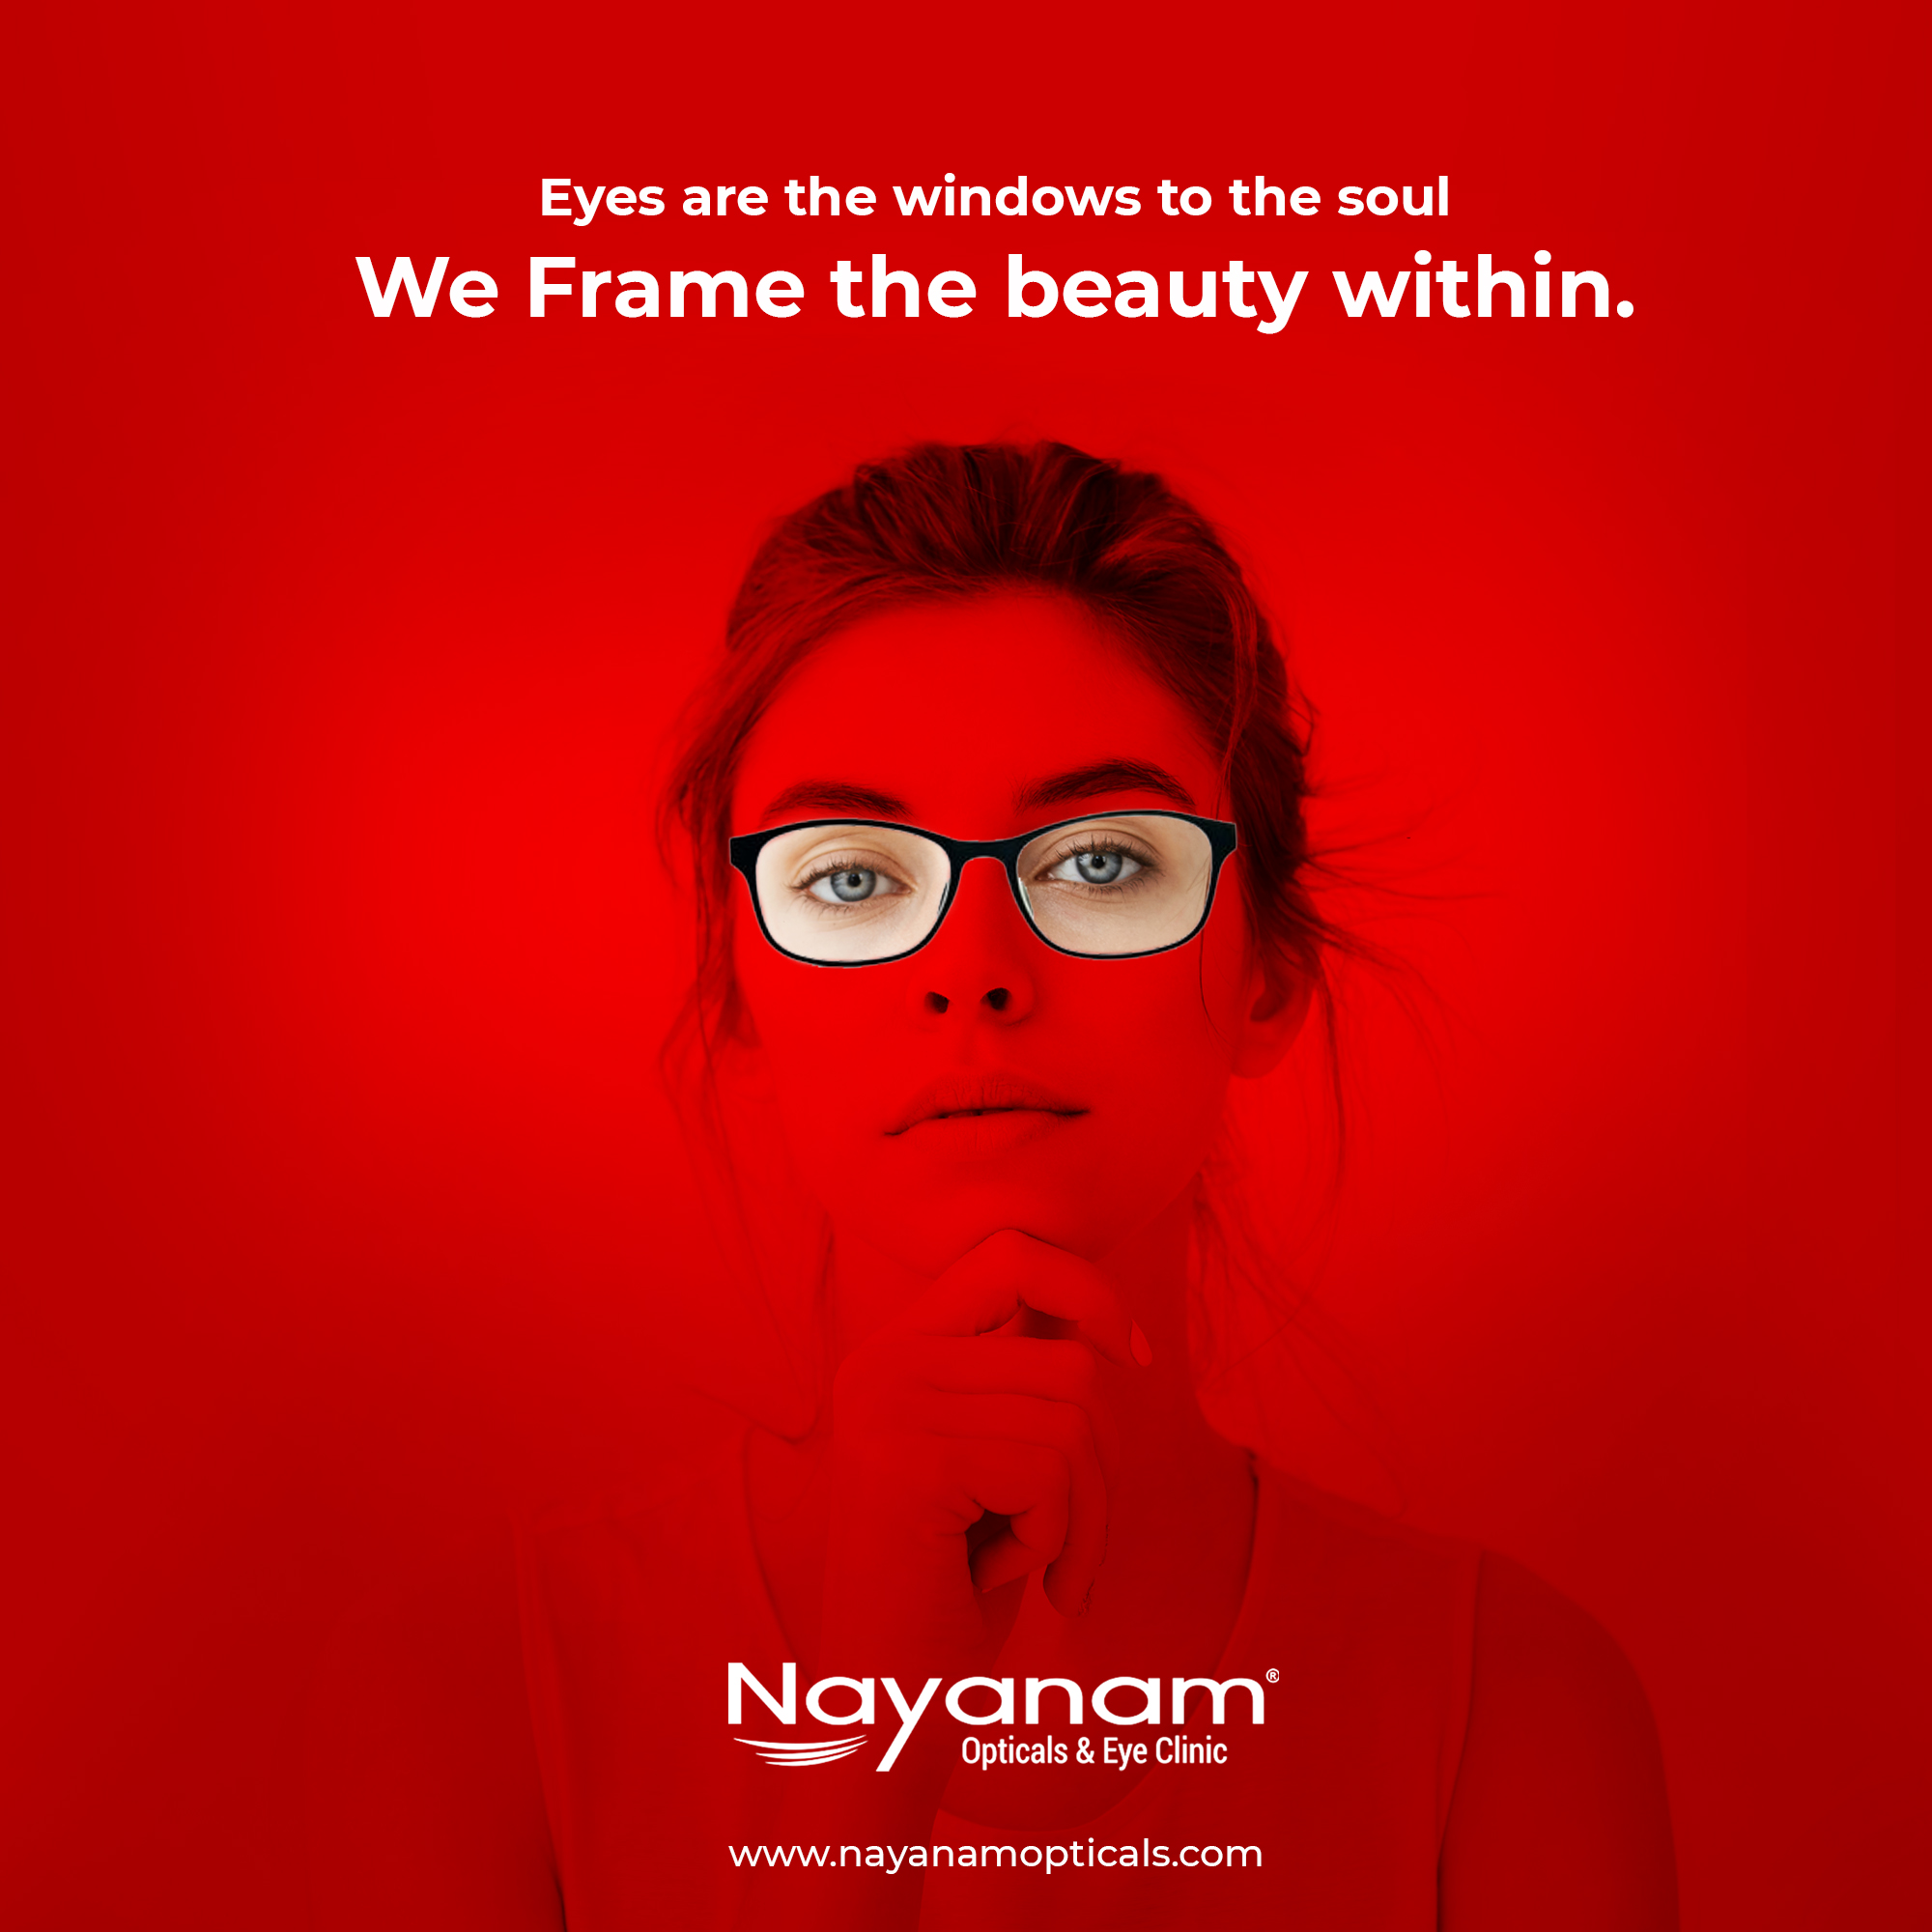 Instagram poster of Nayanam Opticals & Eye Clinic India